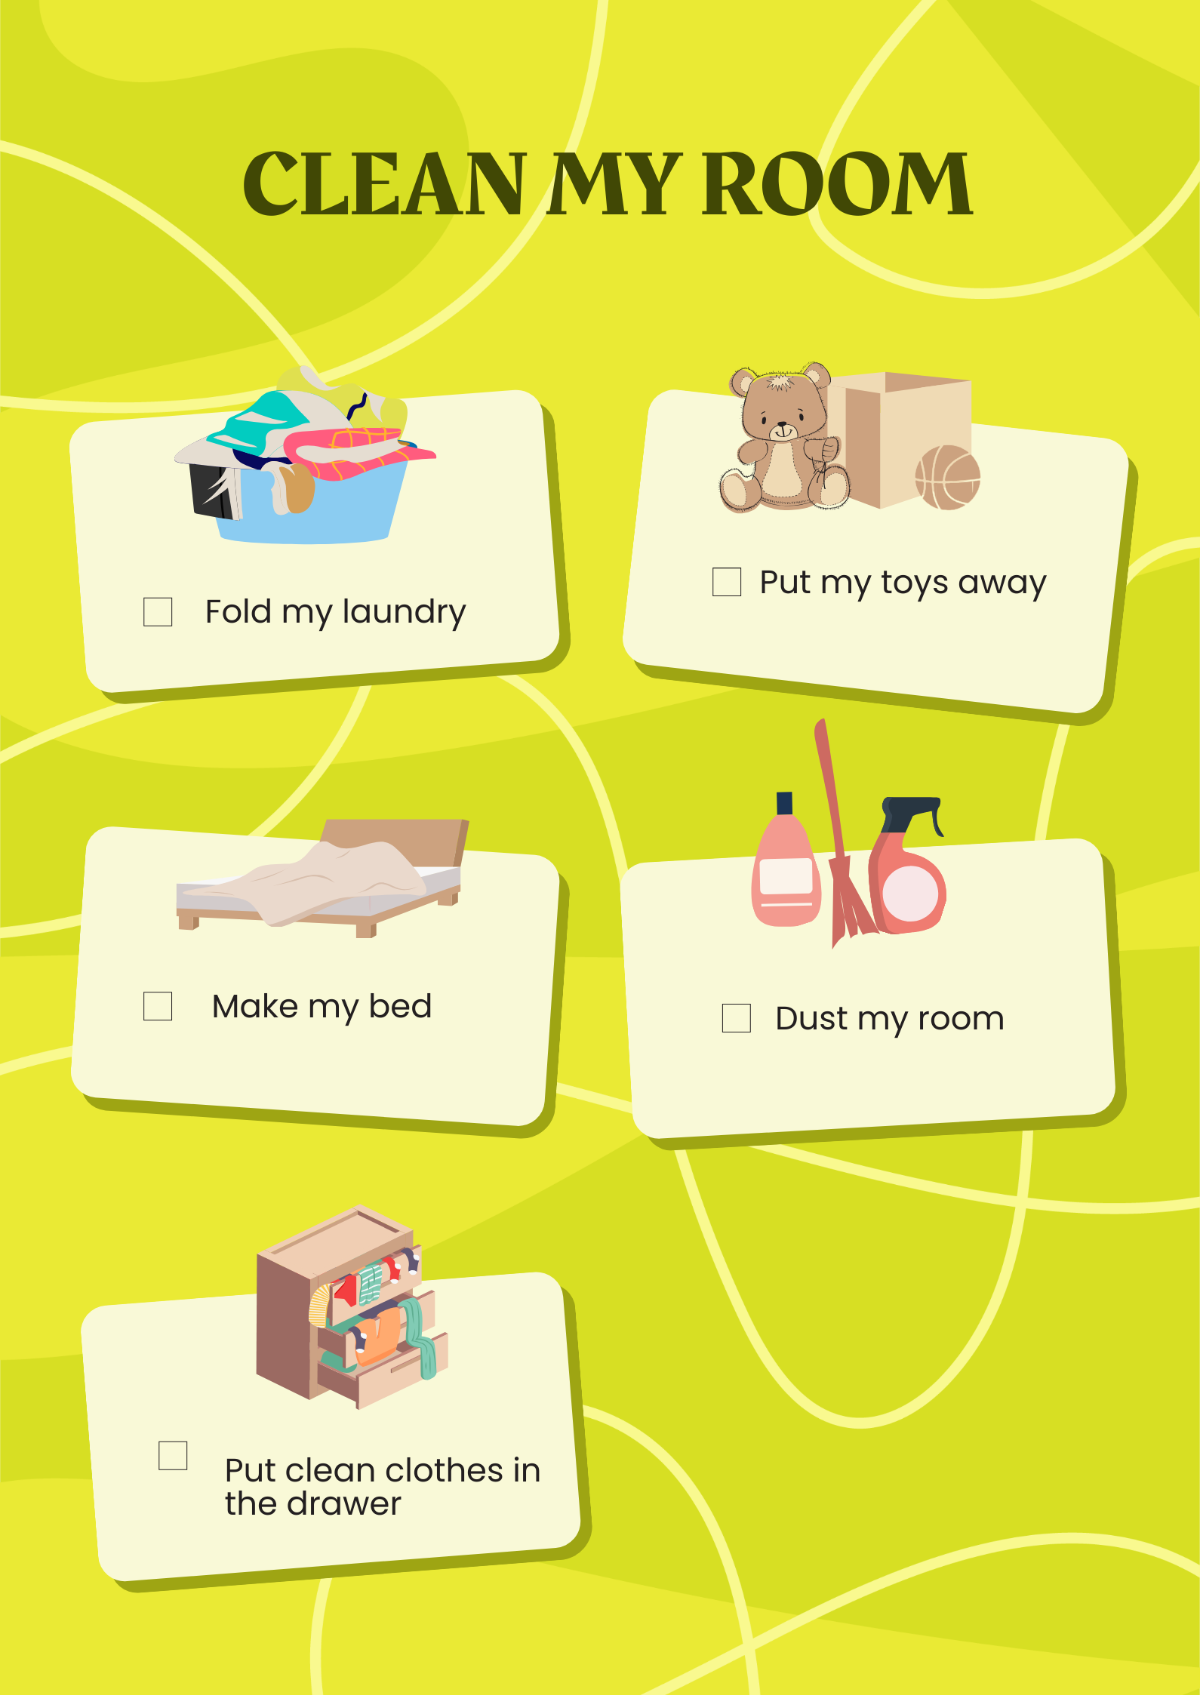 Clean My Room Chart For Children Template